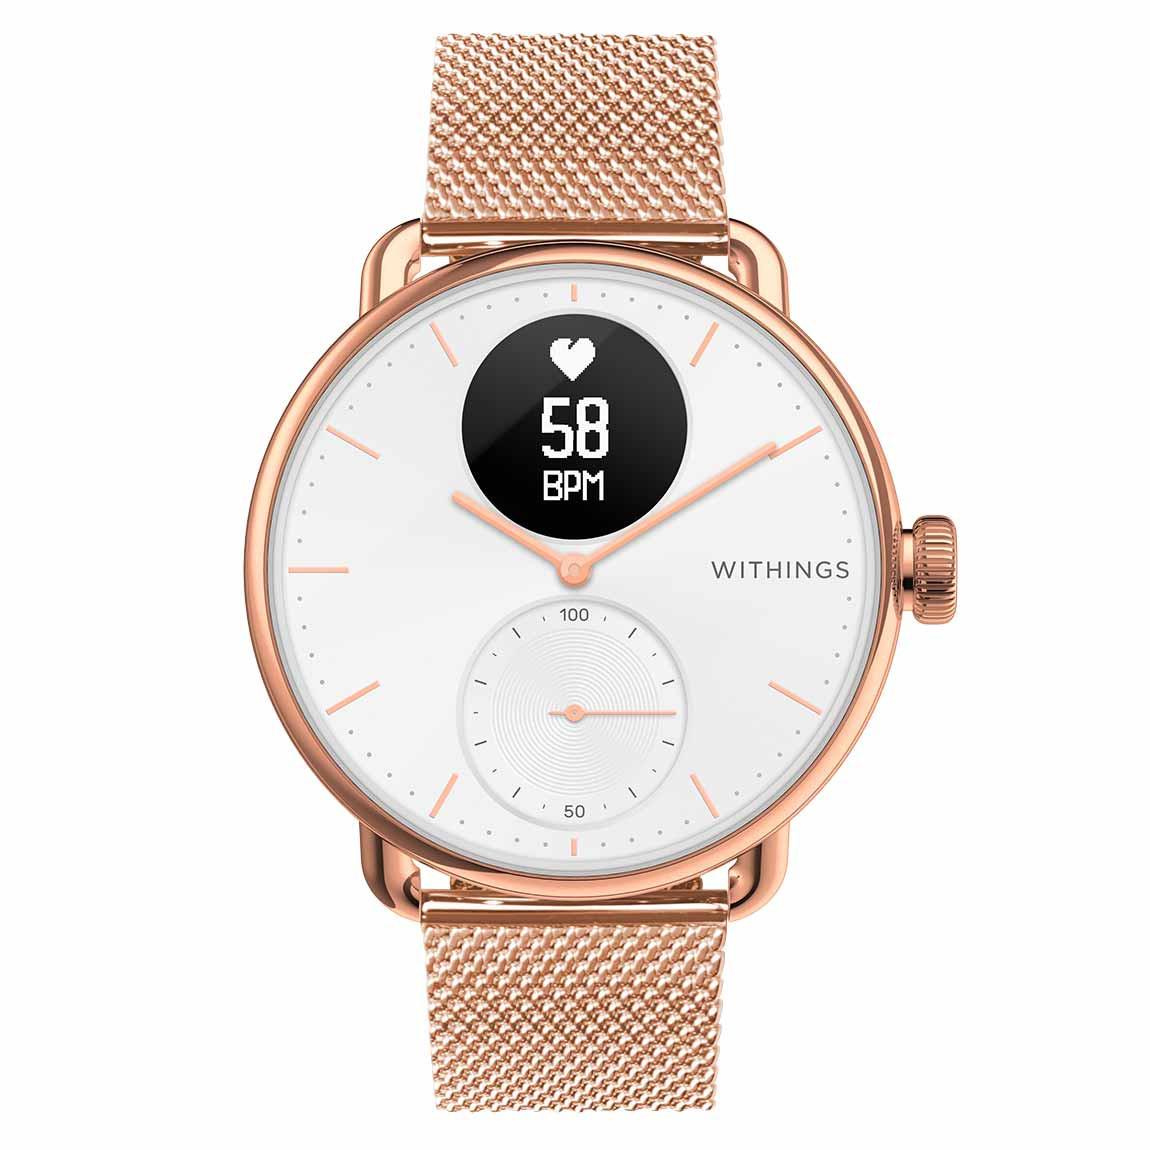 Withings Scanwatch - Milanese Armband Roségold_Uhr